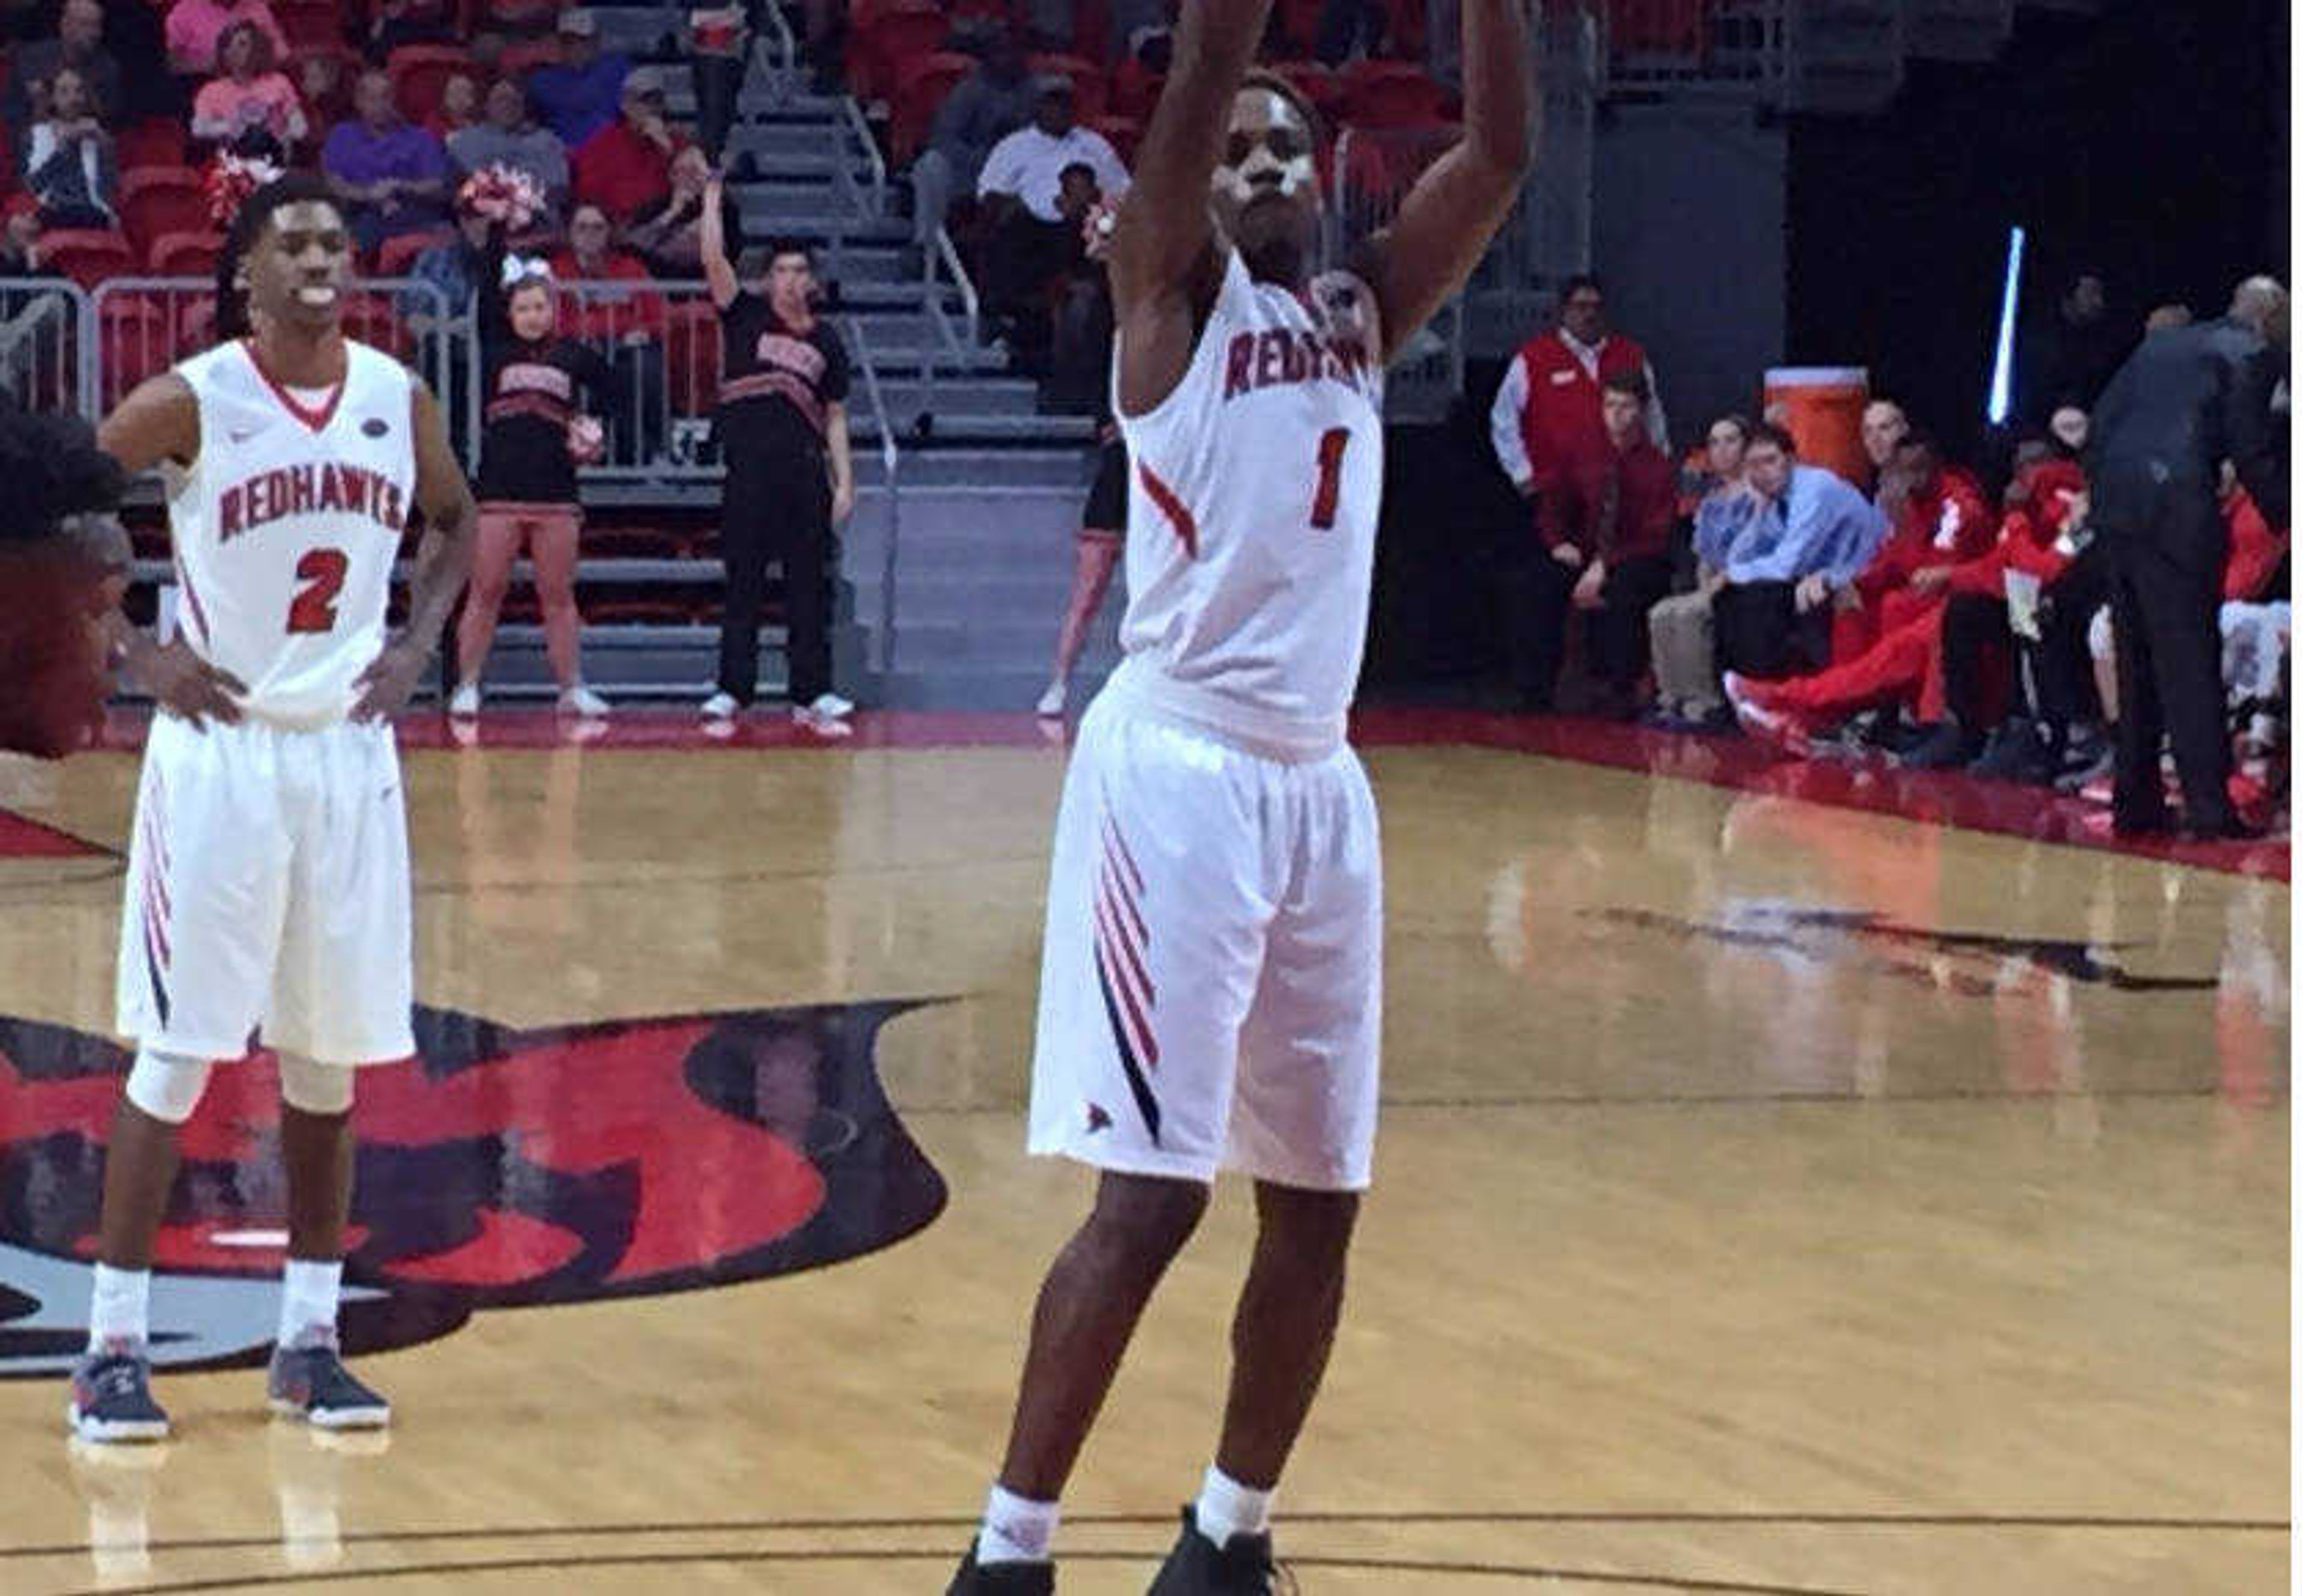 Antonius Cleveland shoots a free throw in the Show Me Center during a home basketball game.